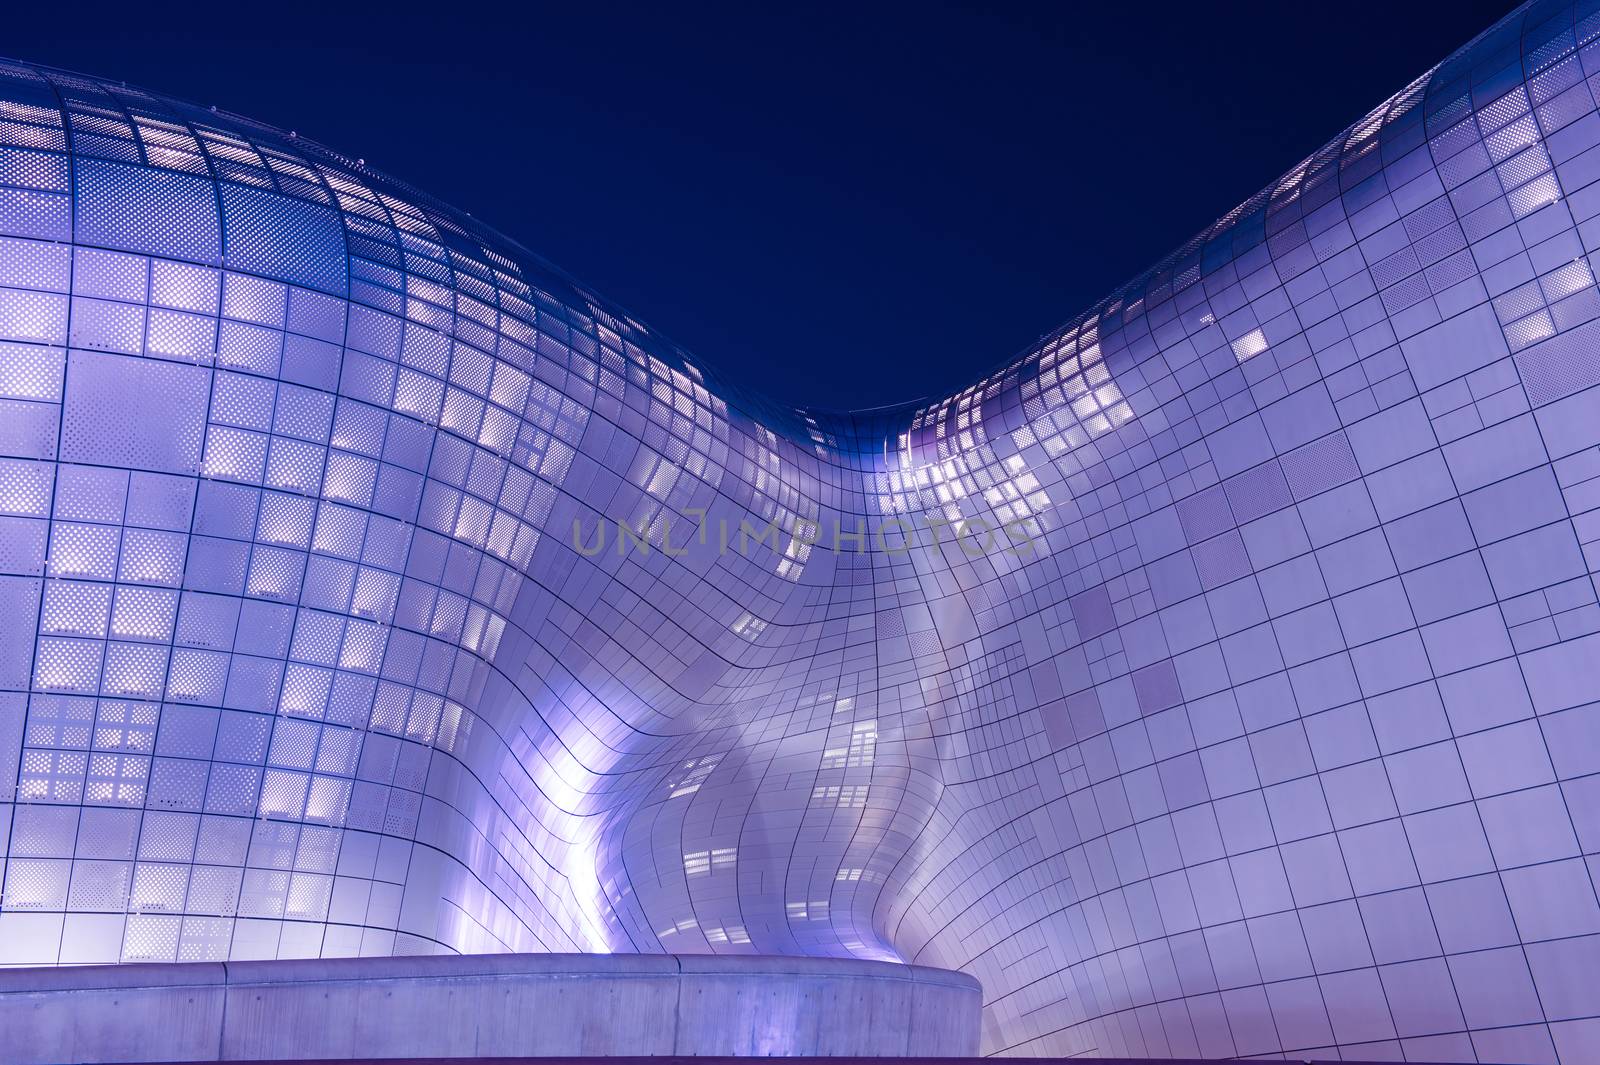 Dongdaemun Design Plaza is a modern architecture in Seoul designed by Zaha Hadid. by gutarphotoghaphy